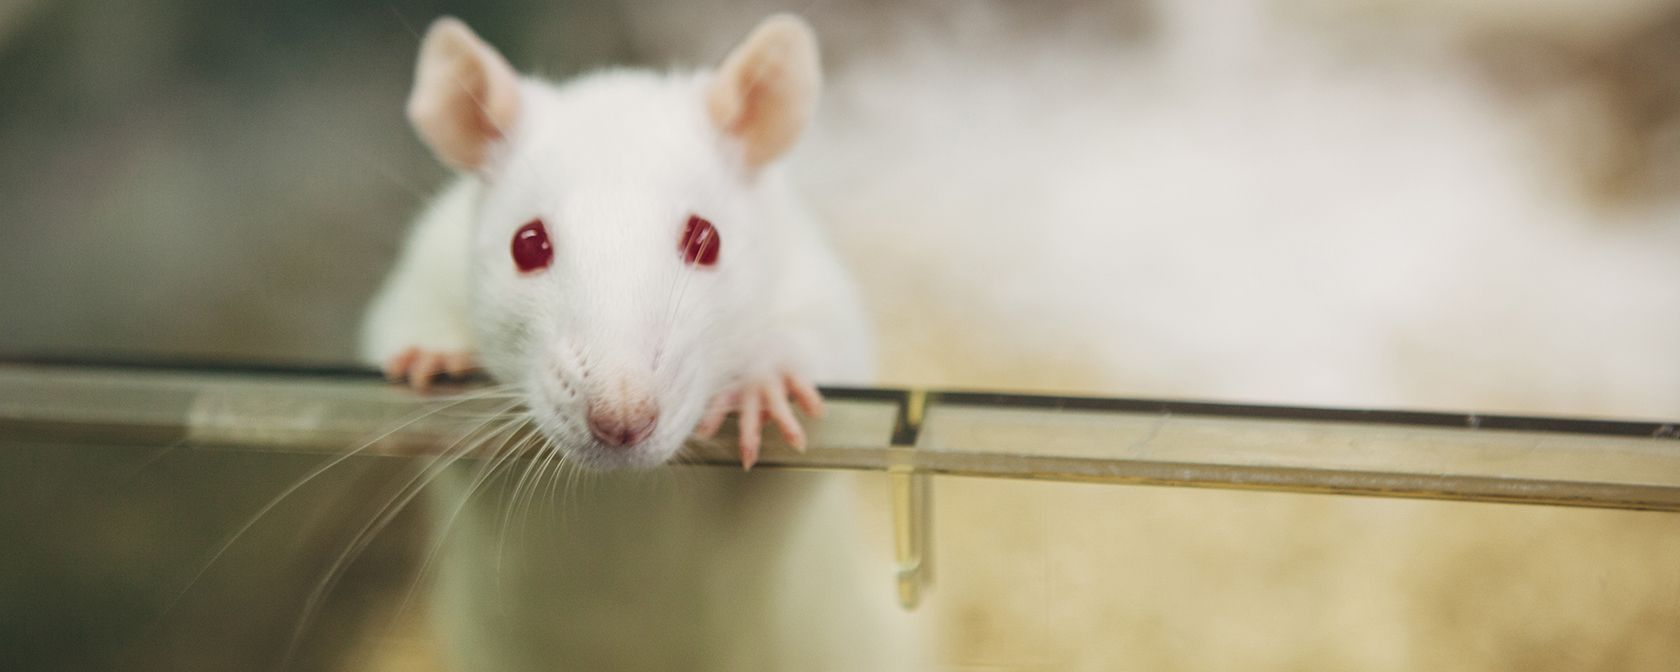 Tell the FDA: No new animal tests for sunscreen ingredients